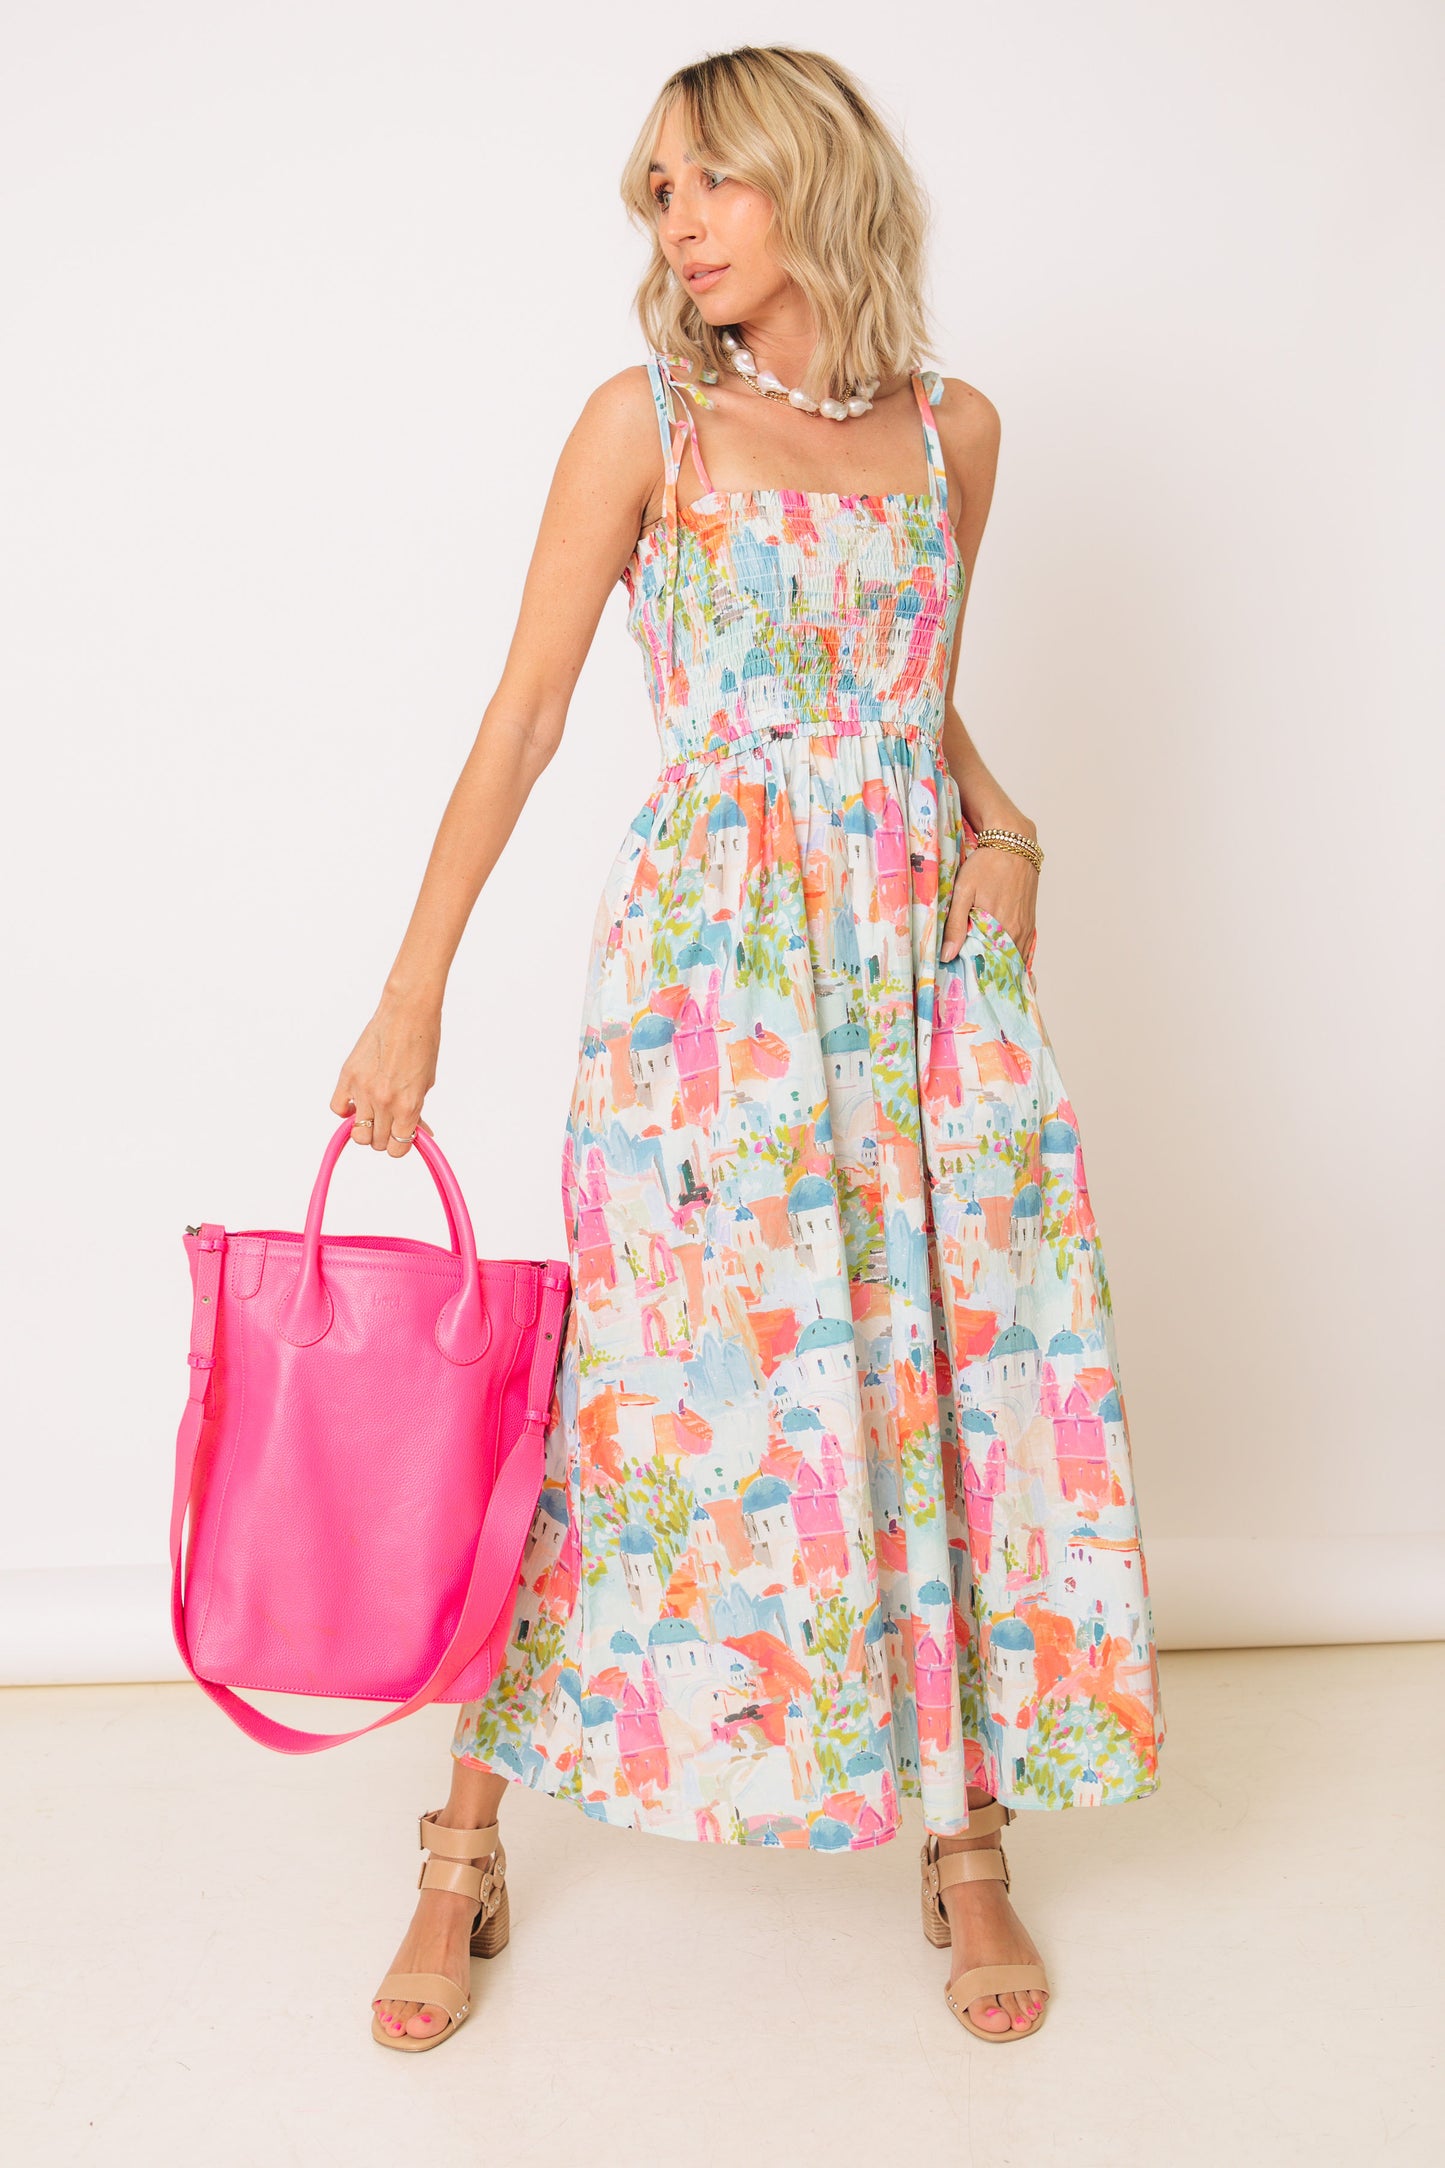 When in Rome - Water Color Vacation Dress (S-L)